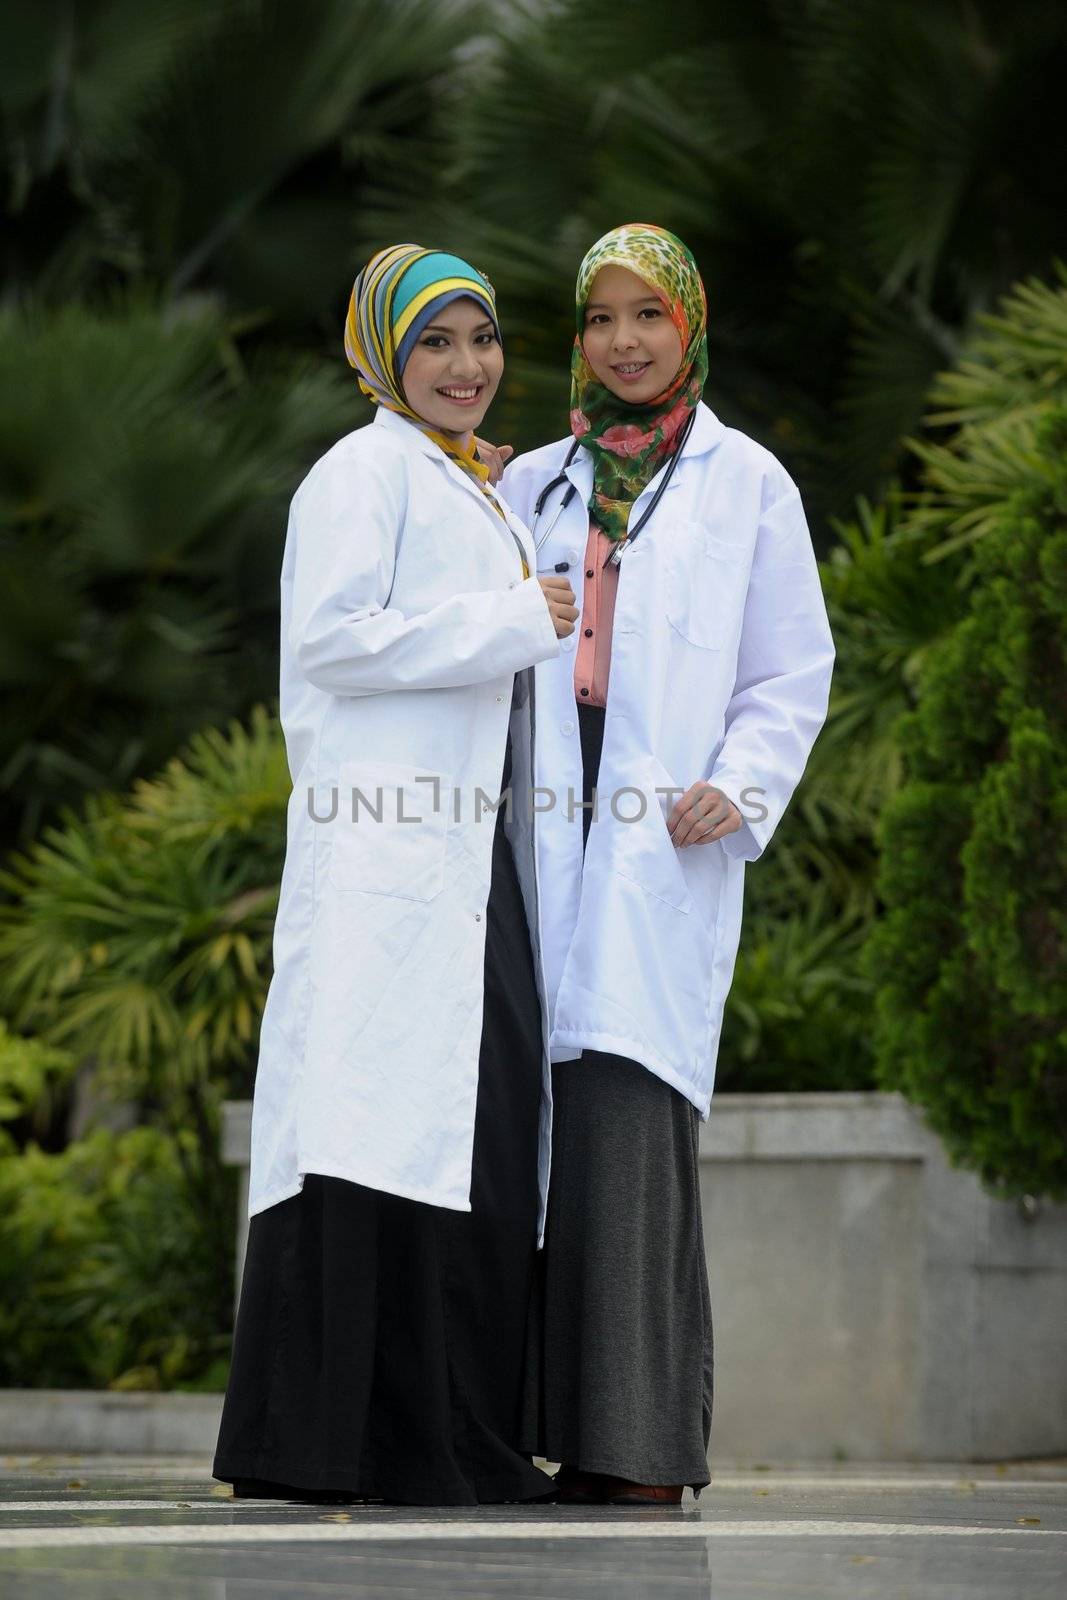 Two Women Doctor With Scarf, Outdoor by jaggat